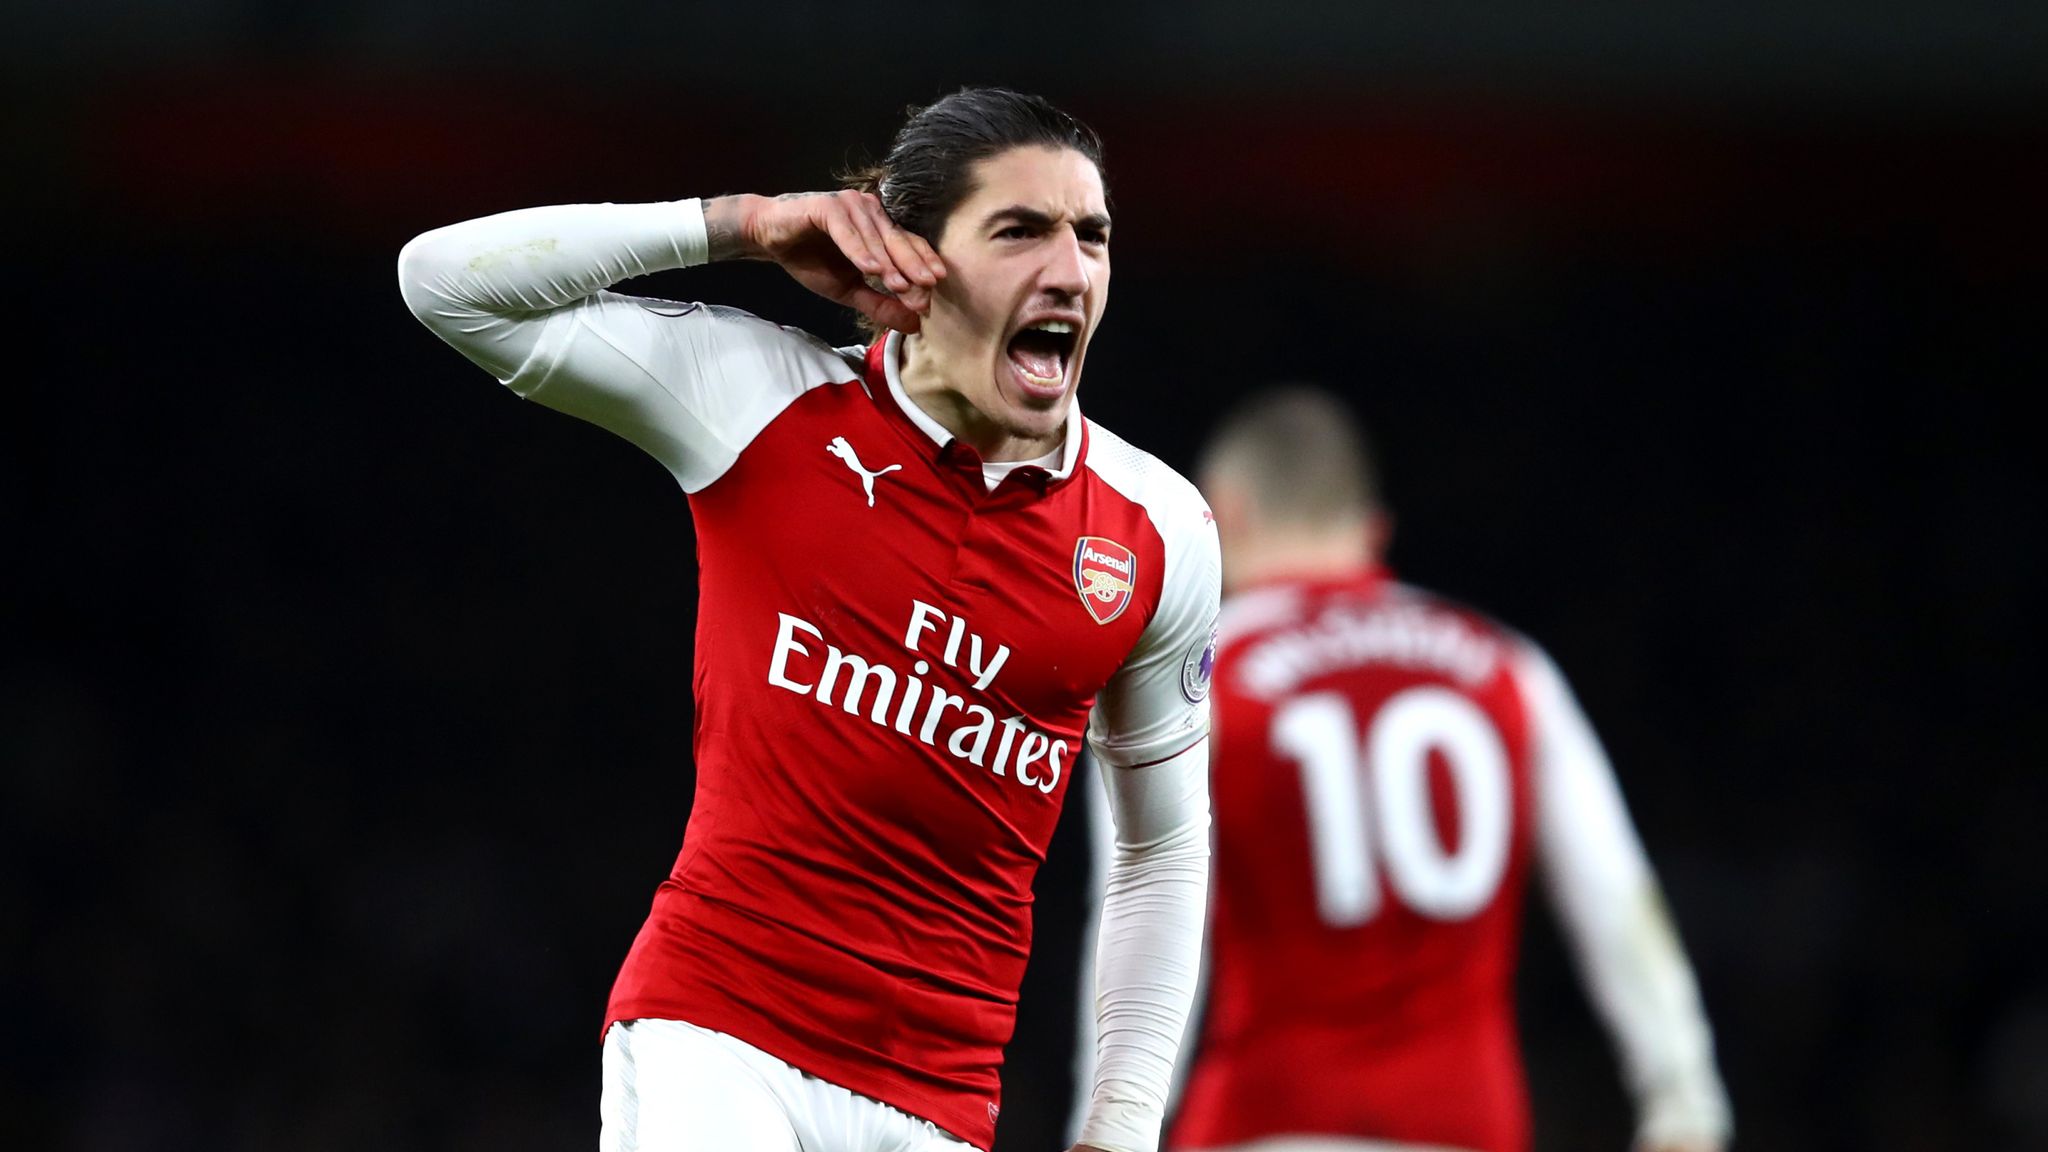 Hector Bellerin deserves to be Arsenal's next captain - The Short Fuse